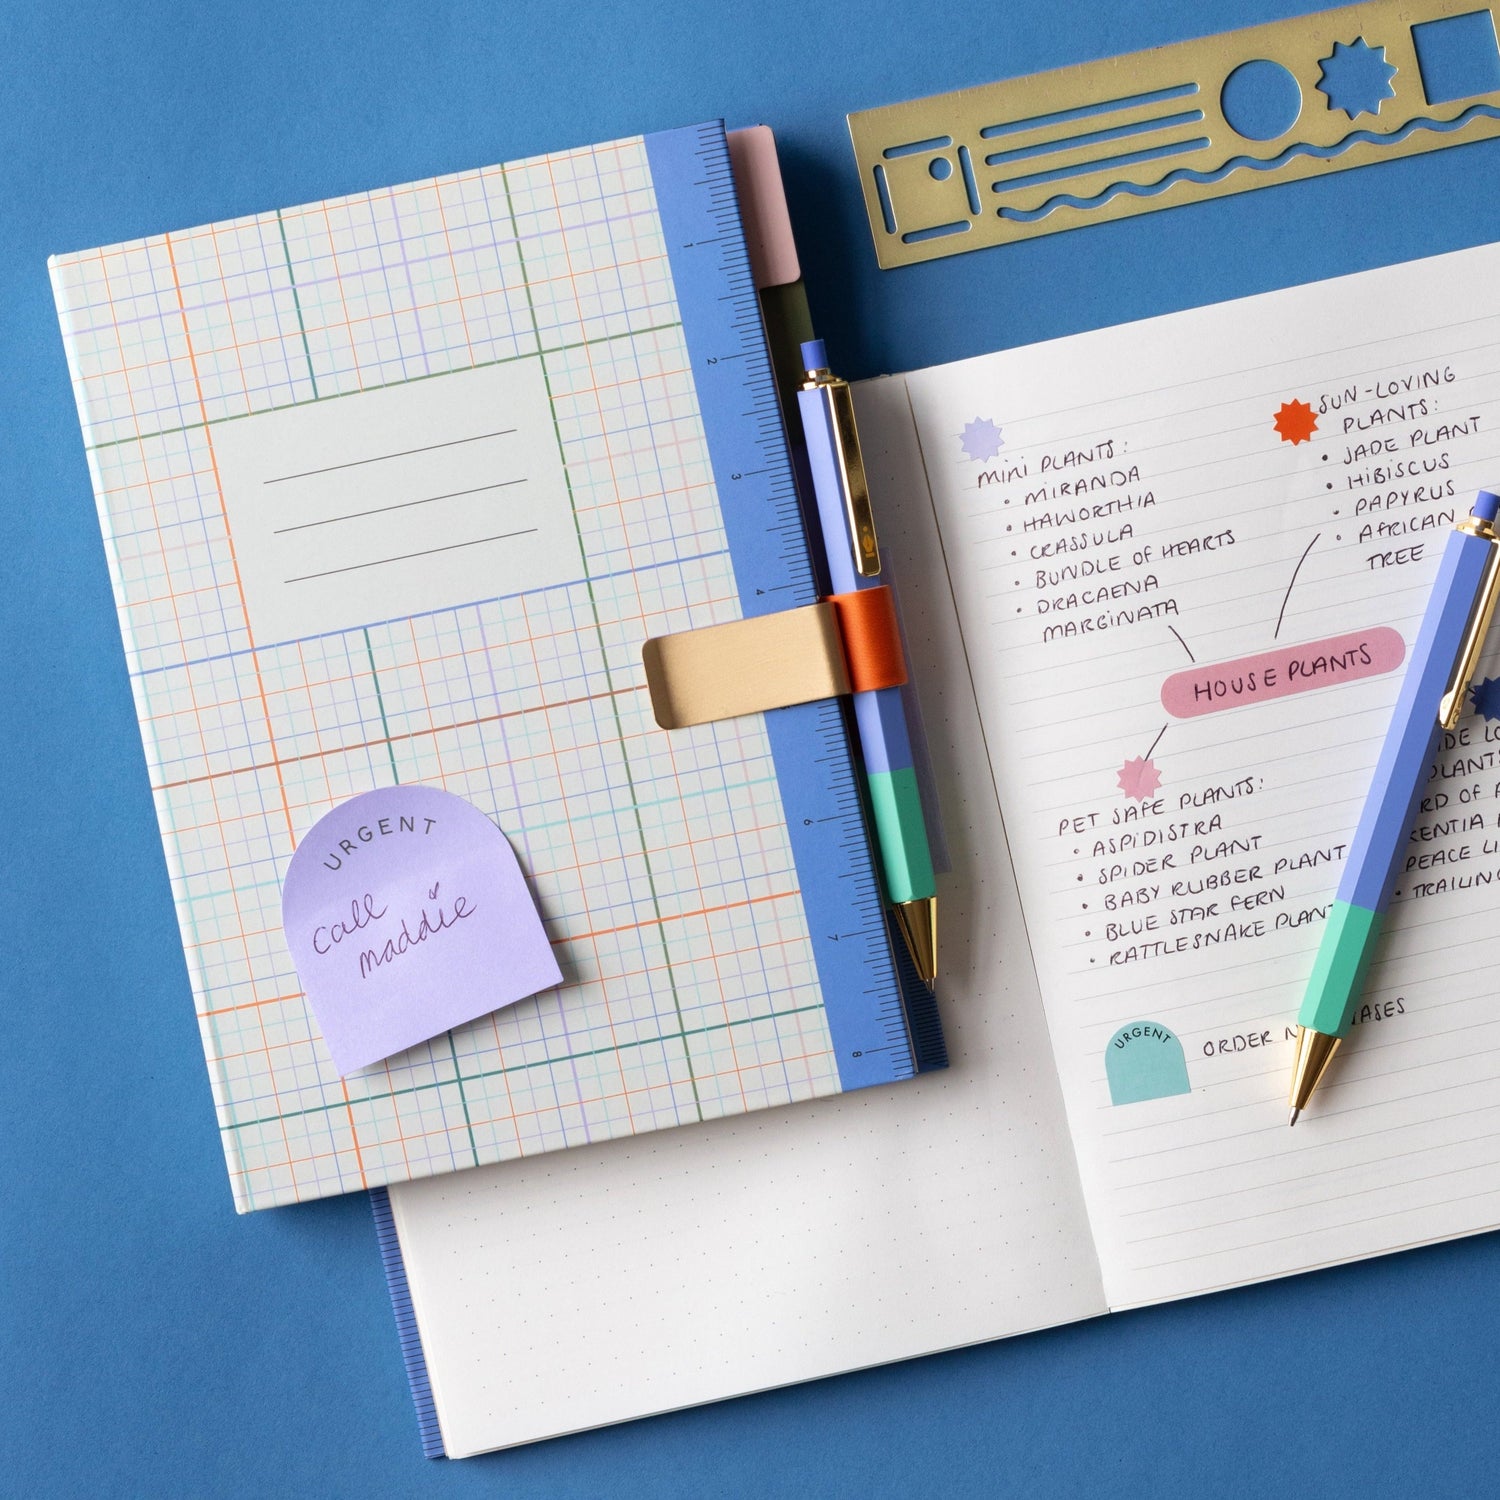 Inkerie Divider Notebook with Ruler